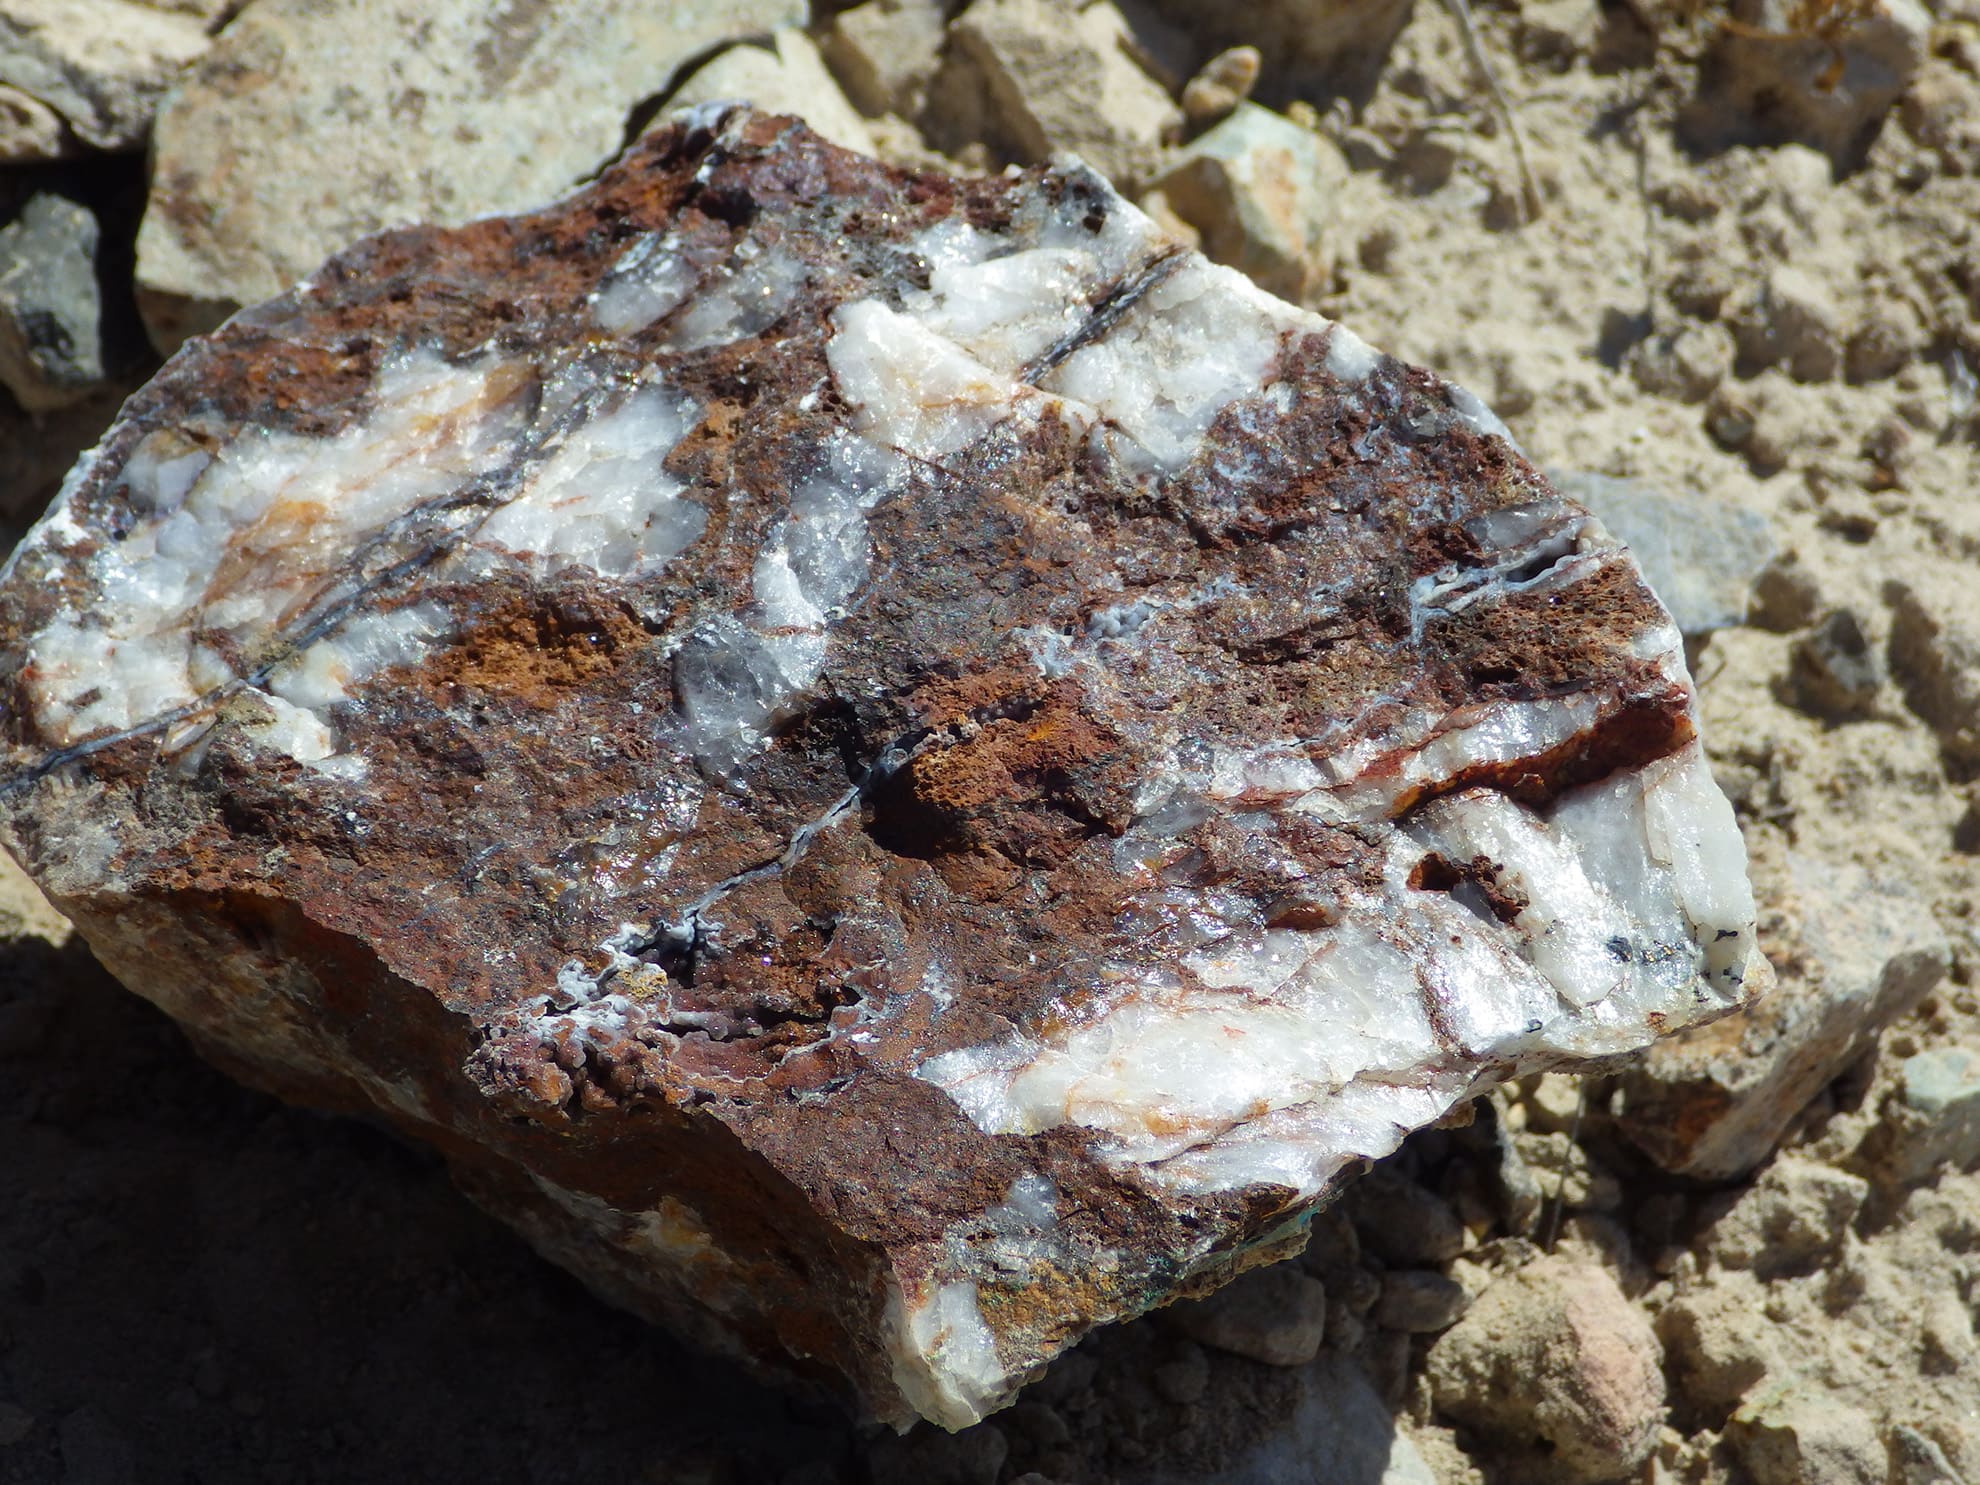 Quartz vein on central GW fault with clots and seams of glassy limonite and copper wad after chalcopyrite (copper sulfide), and 112 g/t silver